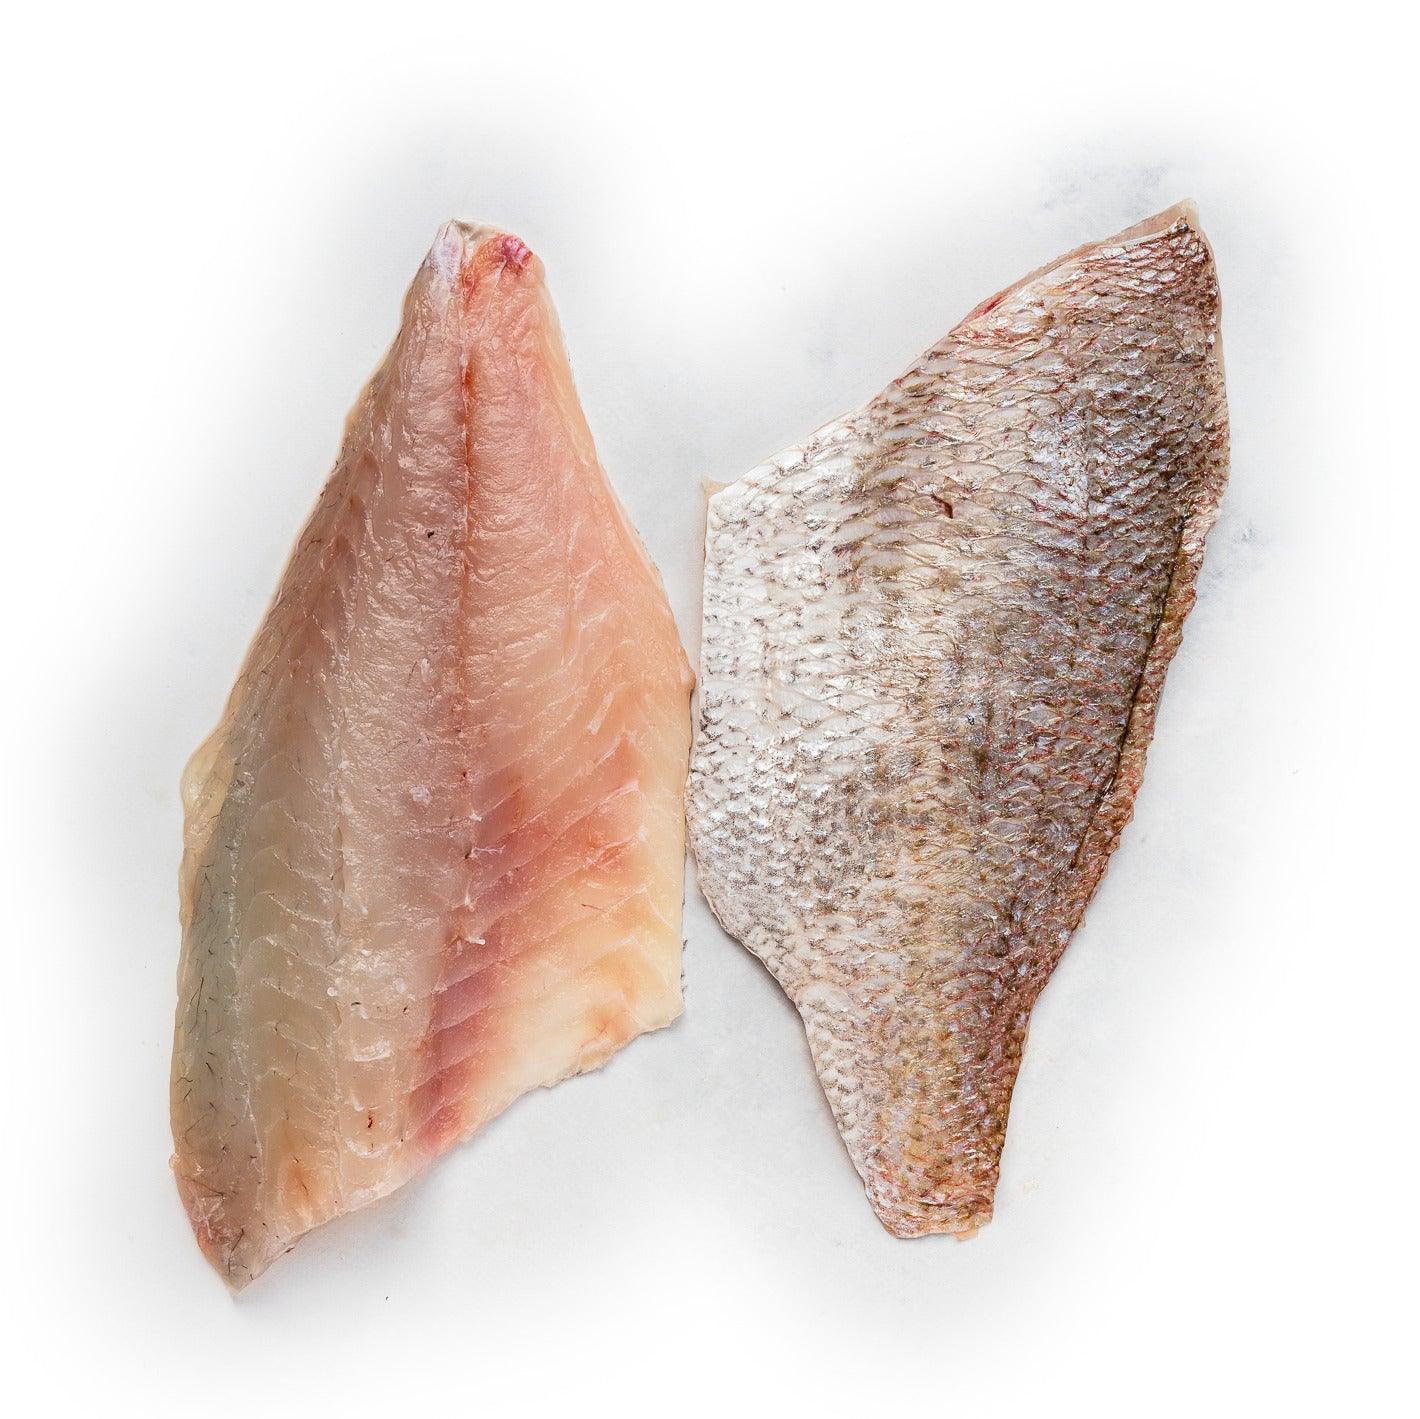 New Zealand Snapper Fillet, 350g from Steve Costi Seafood